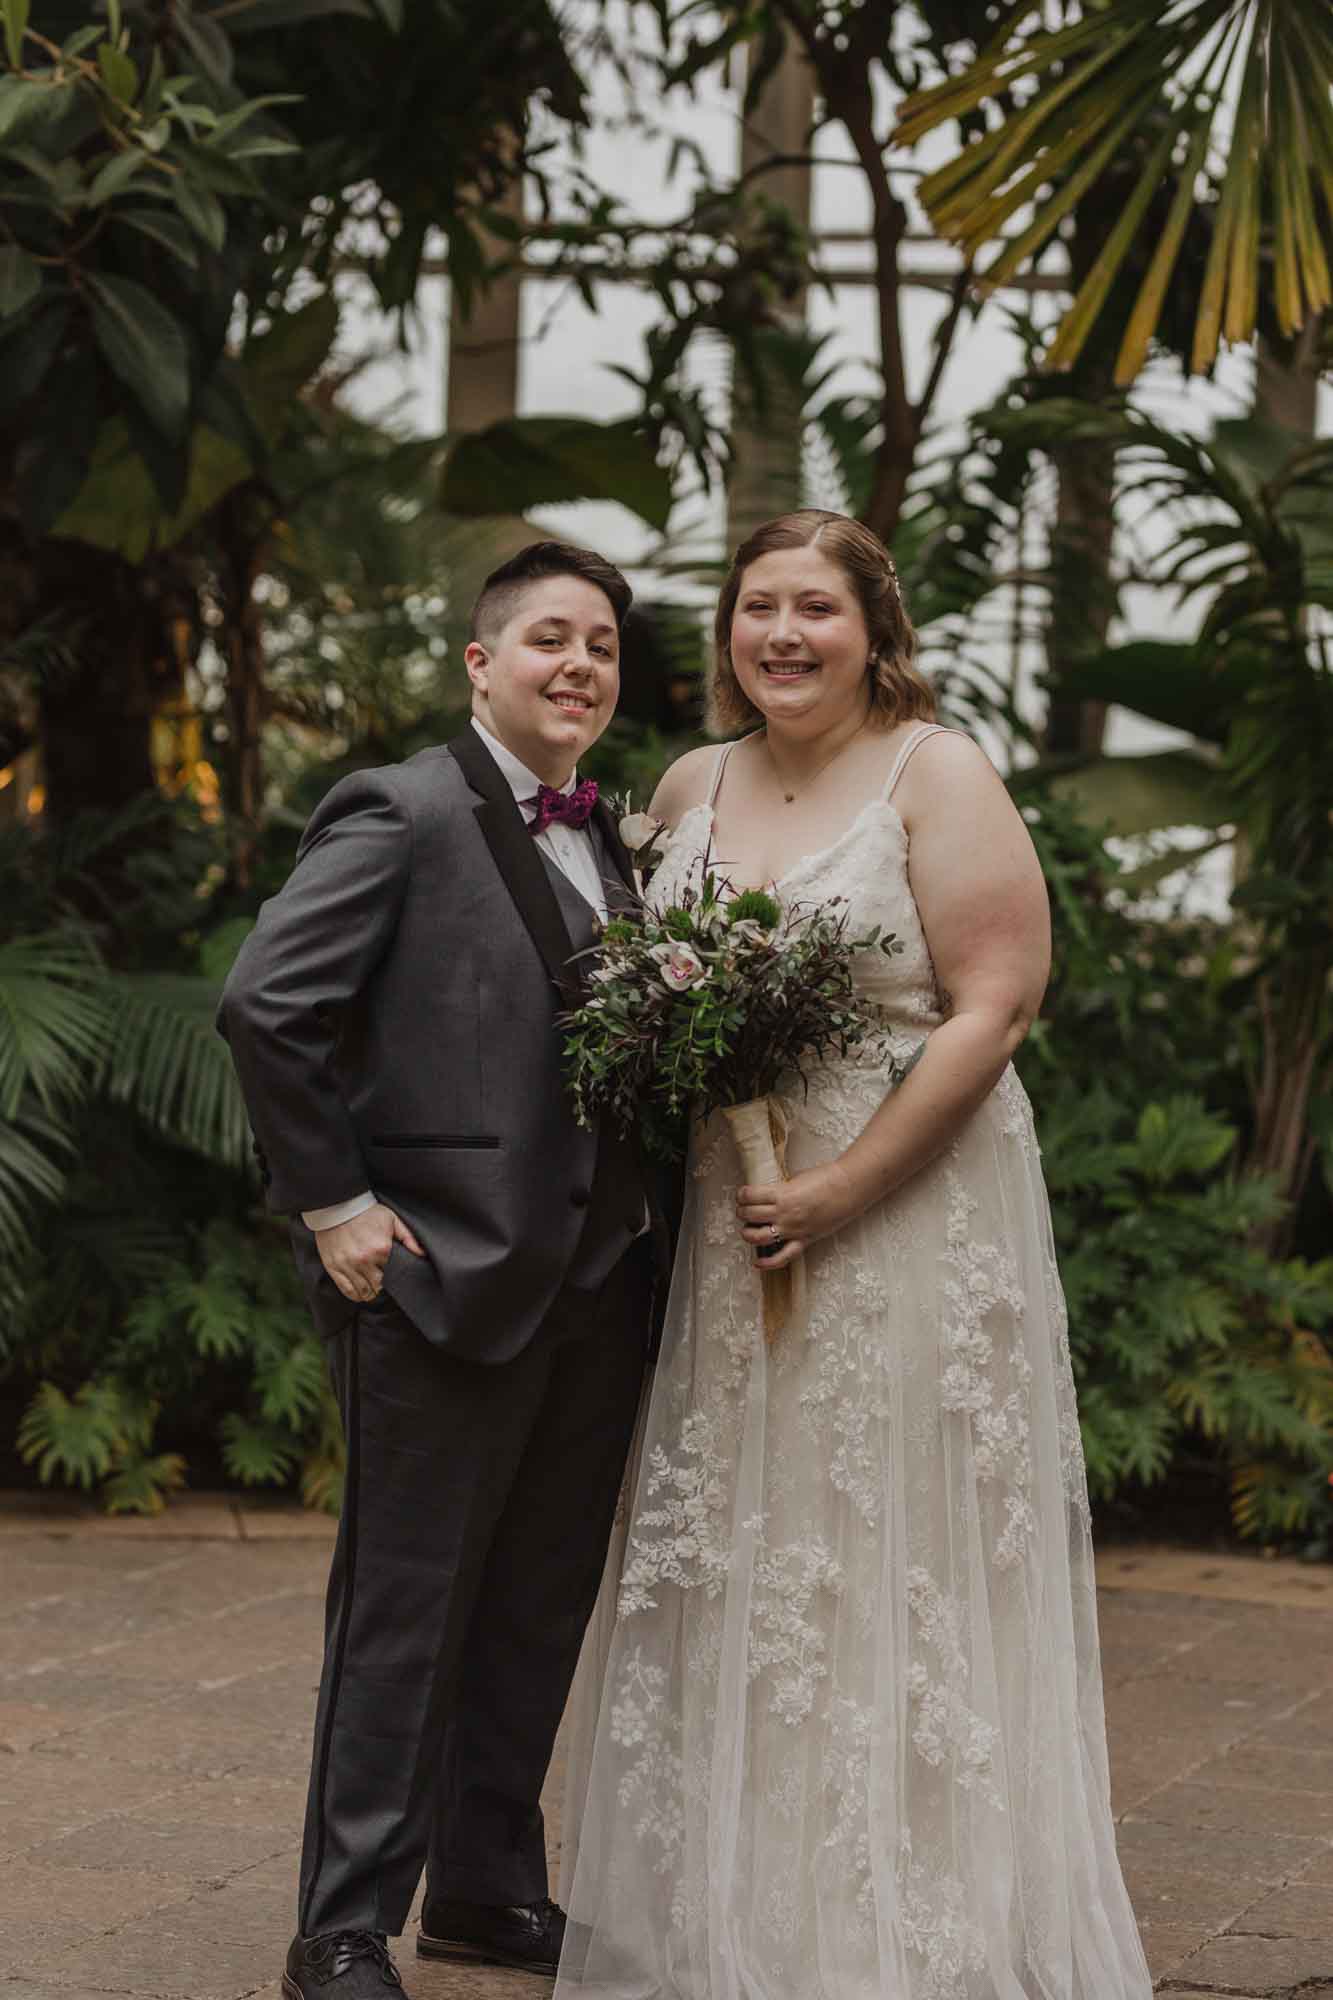 Intimate, relaxed botanic gardens wedding in New York | Kiran Photography | Featured on Equally Wed, the leading LGBTQ+ wedding magazine